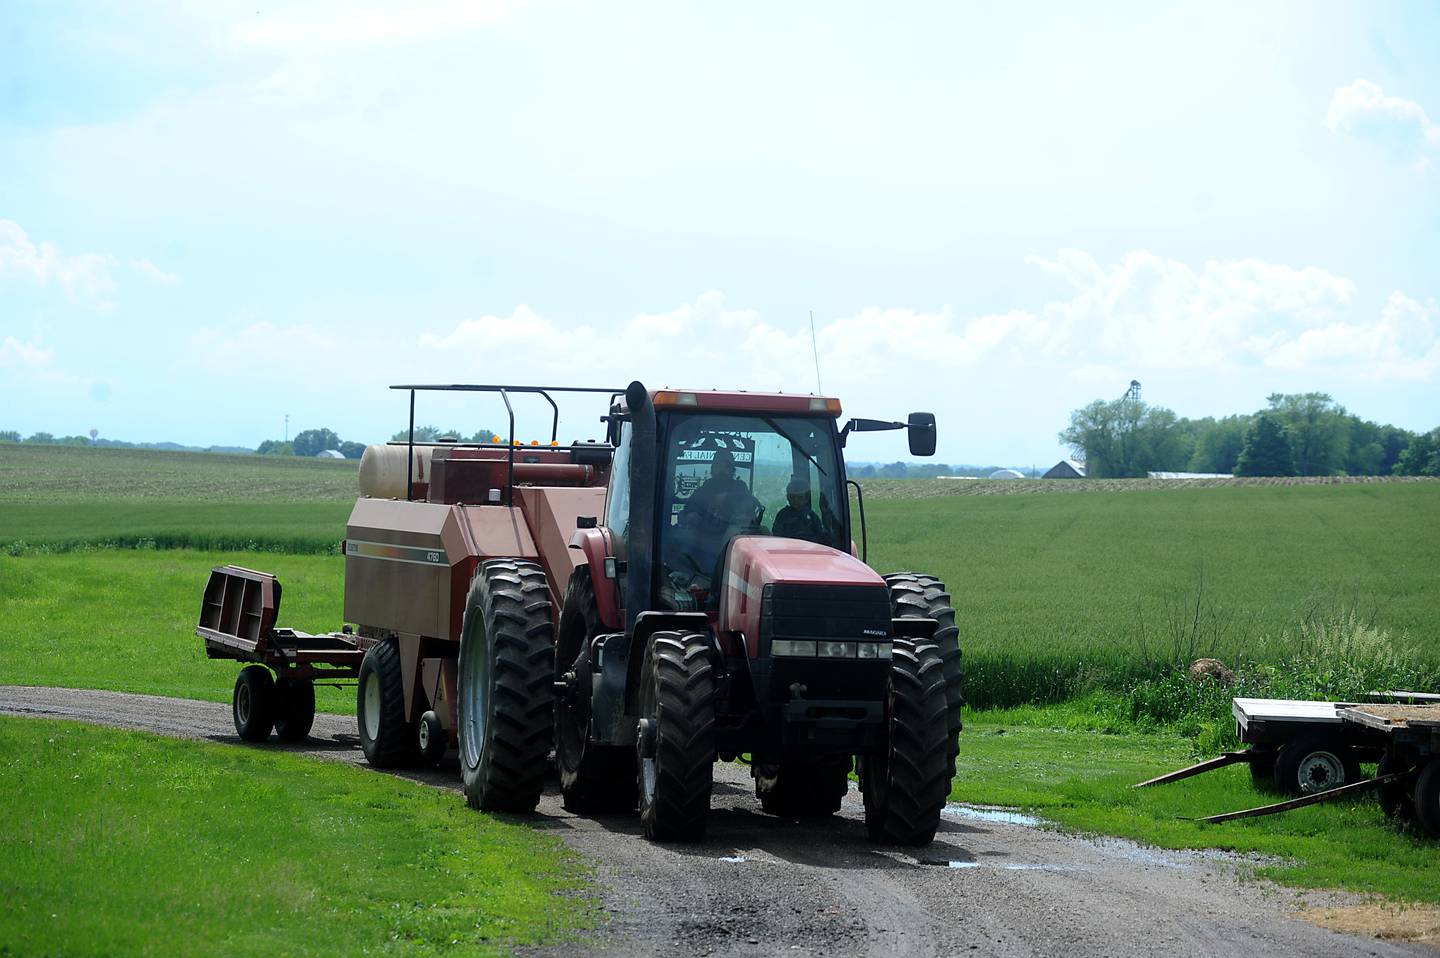 Farmer Bryon Kelly brings his tracker and baler to his fuel storage tank to fill up the tractor with diesel fuel Friday, June 10, 2022, after baling hay on his farm near Richmond. The rising cost of nitrate and fuels is raising farmers' operational costs.